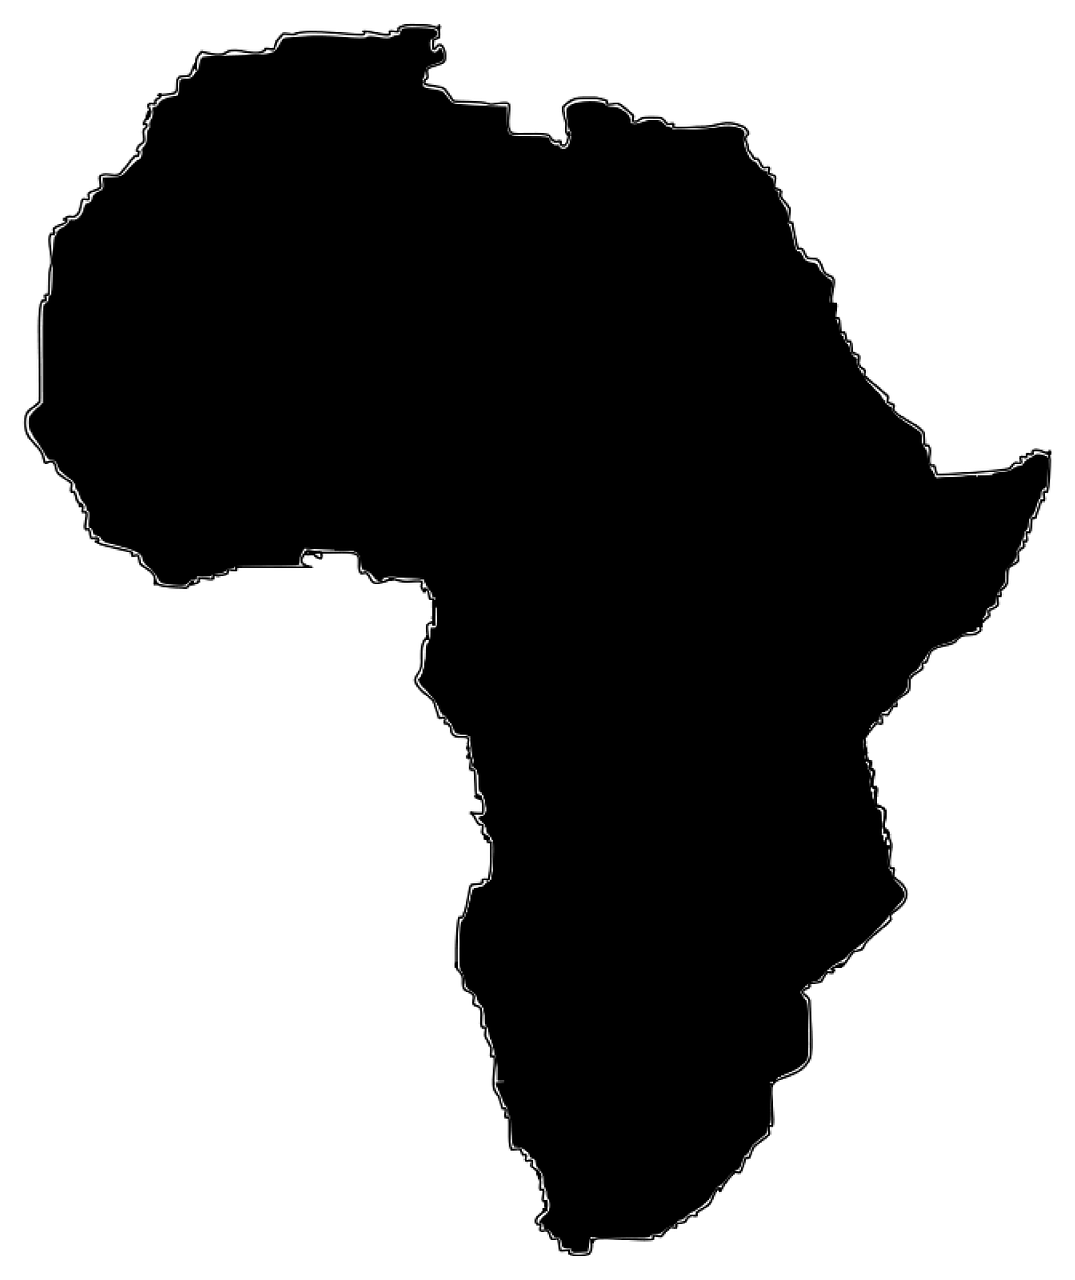 africa continent geography free photo